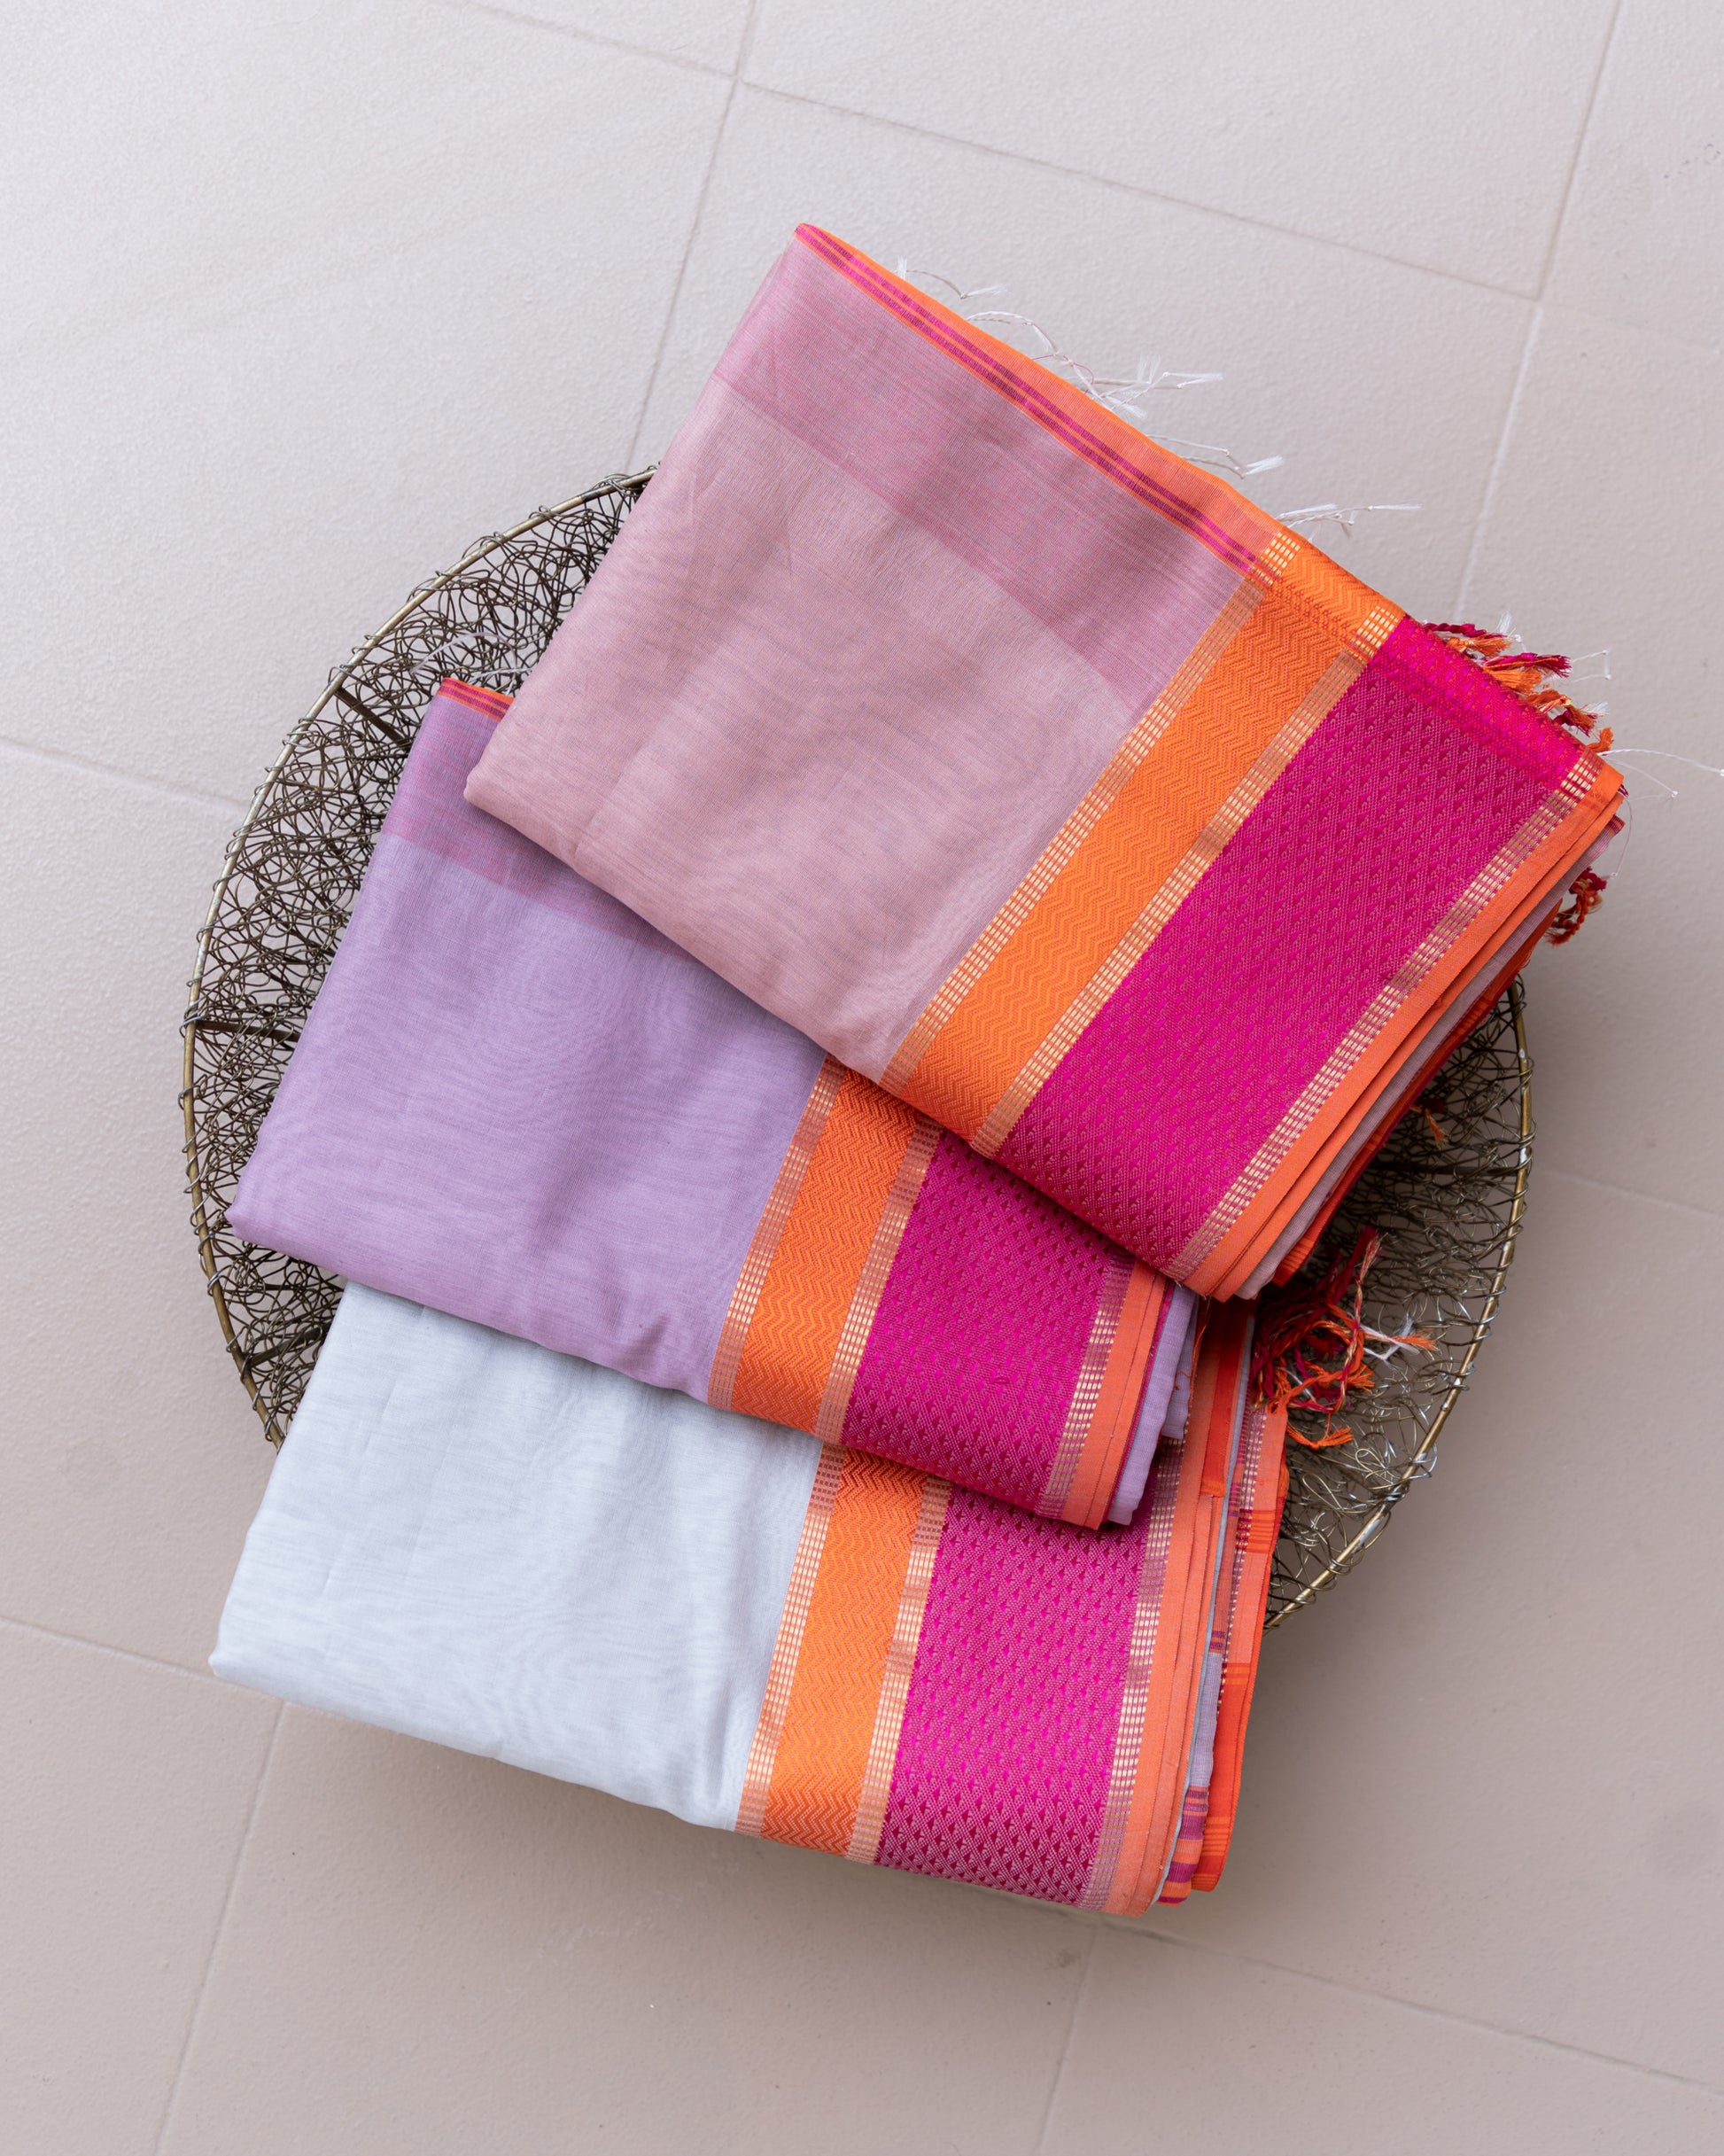 Maheshwari Saree is a cotton and pure silk fabric woven with zari or brocade in varied designs. These designs include stripes, checks and floral borders. Originating from the town of Maheshwar, Madhya Pradesh.Maheshwari Saree is a cotton and pure silk fabric woven with zari or brocade in varied designs